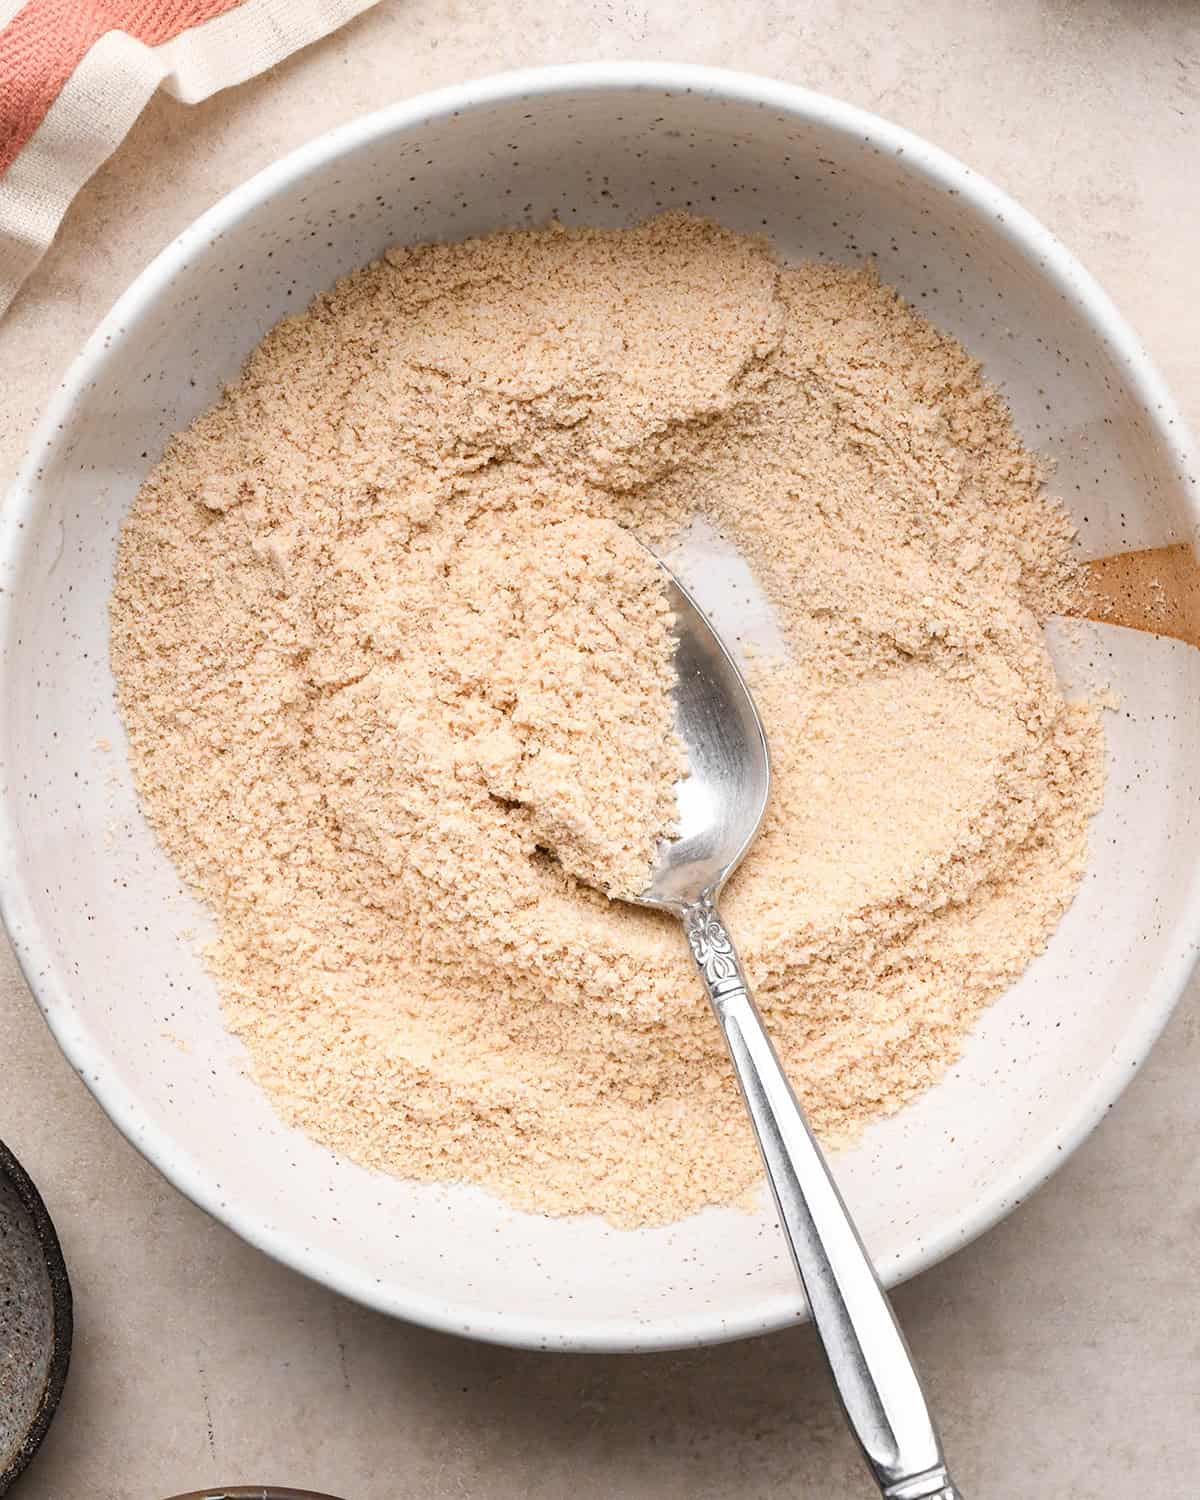 Paleo Banana Bread dry ingredient mixture in a bowl after mixing